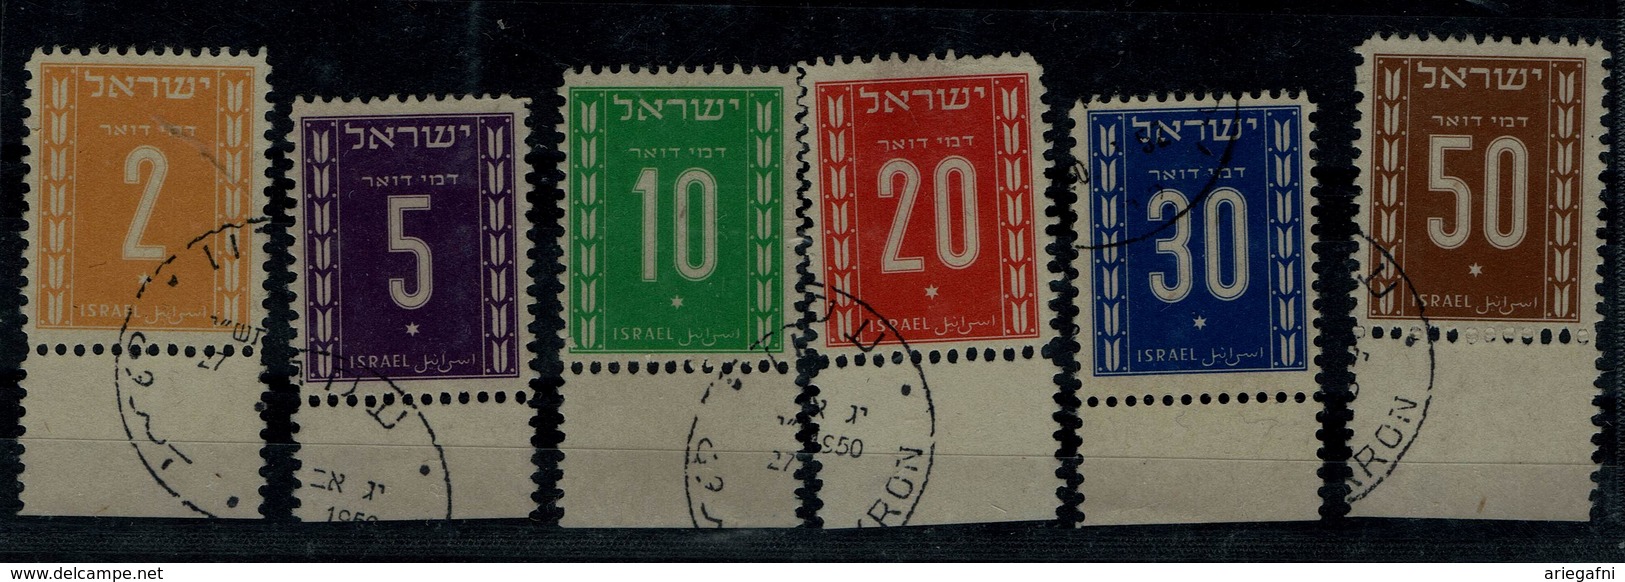 ISRAEL 1949 2nd POSTAGE DUE WITH TABS USED VF!! - Usati (con Tab)